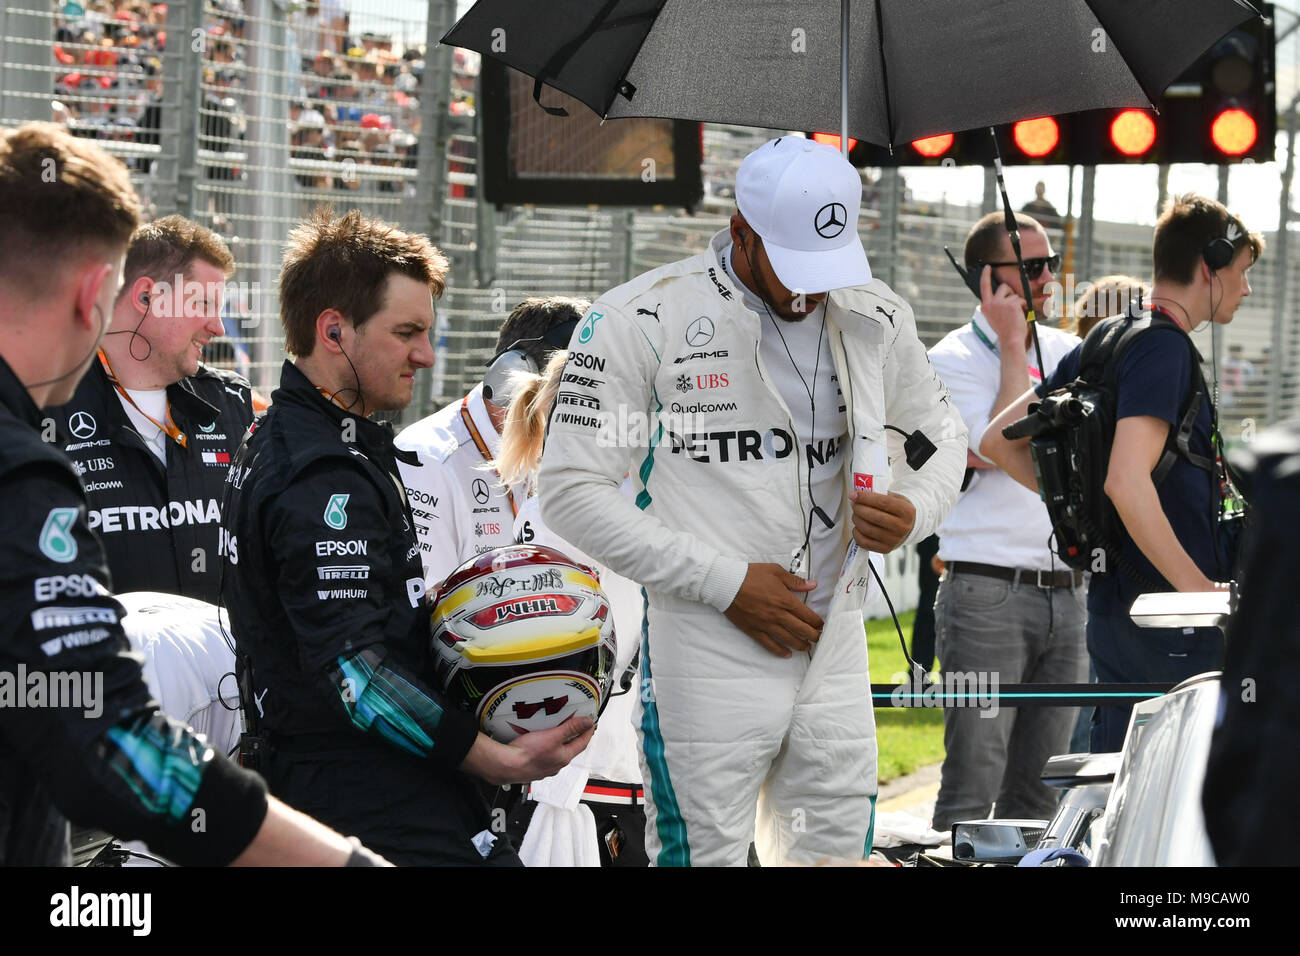 Albert Park, Melbourne, Australia. 25th Mar, 2018. Lewis Hamilton (GBR) #44 from the Mercedes AMG Petronas Motorsport team puts on his race suit on the grid prior to the start of the 2018 Australian Formula One Grand Prix at Albert Park, Melbourne, Australia. Sydney Low/Cal Sport Media/Alamy Live News Stock Photo